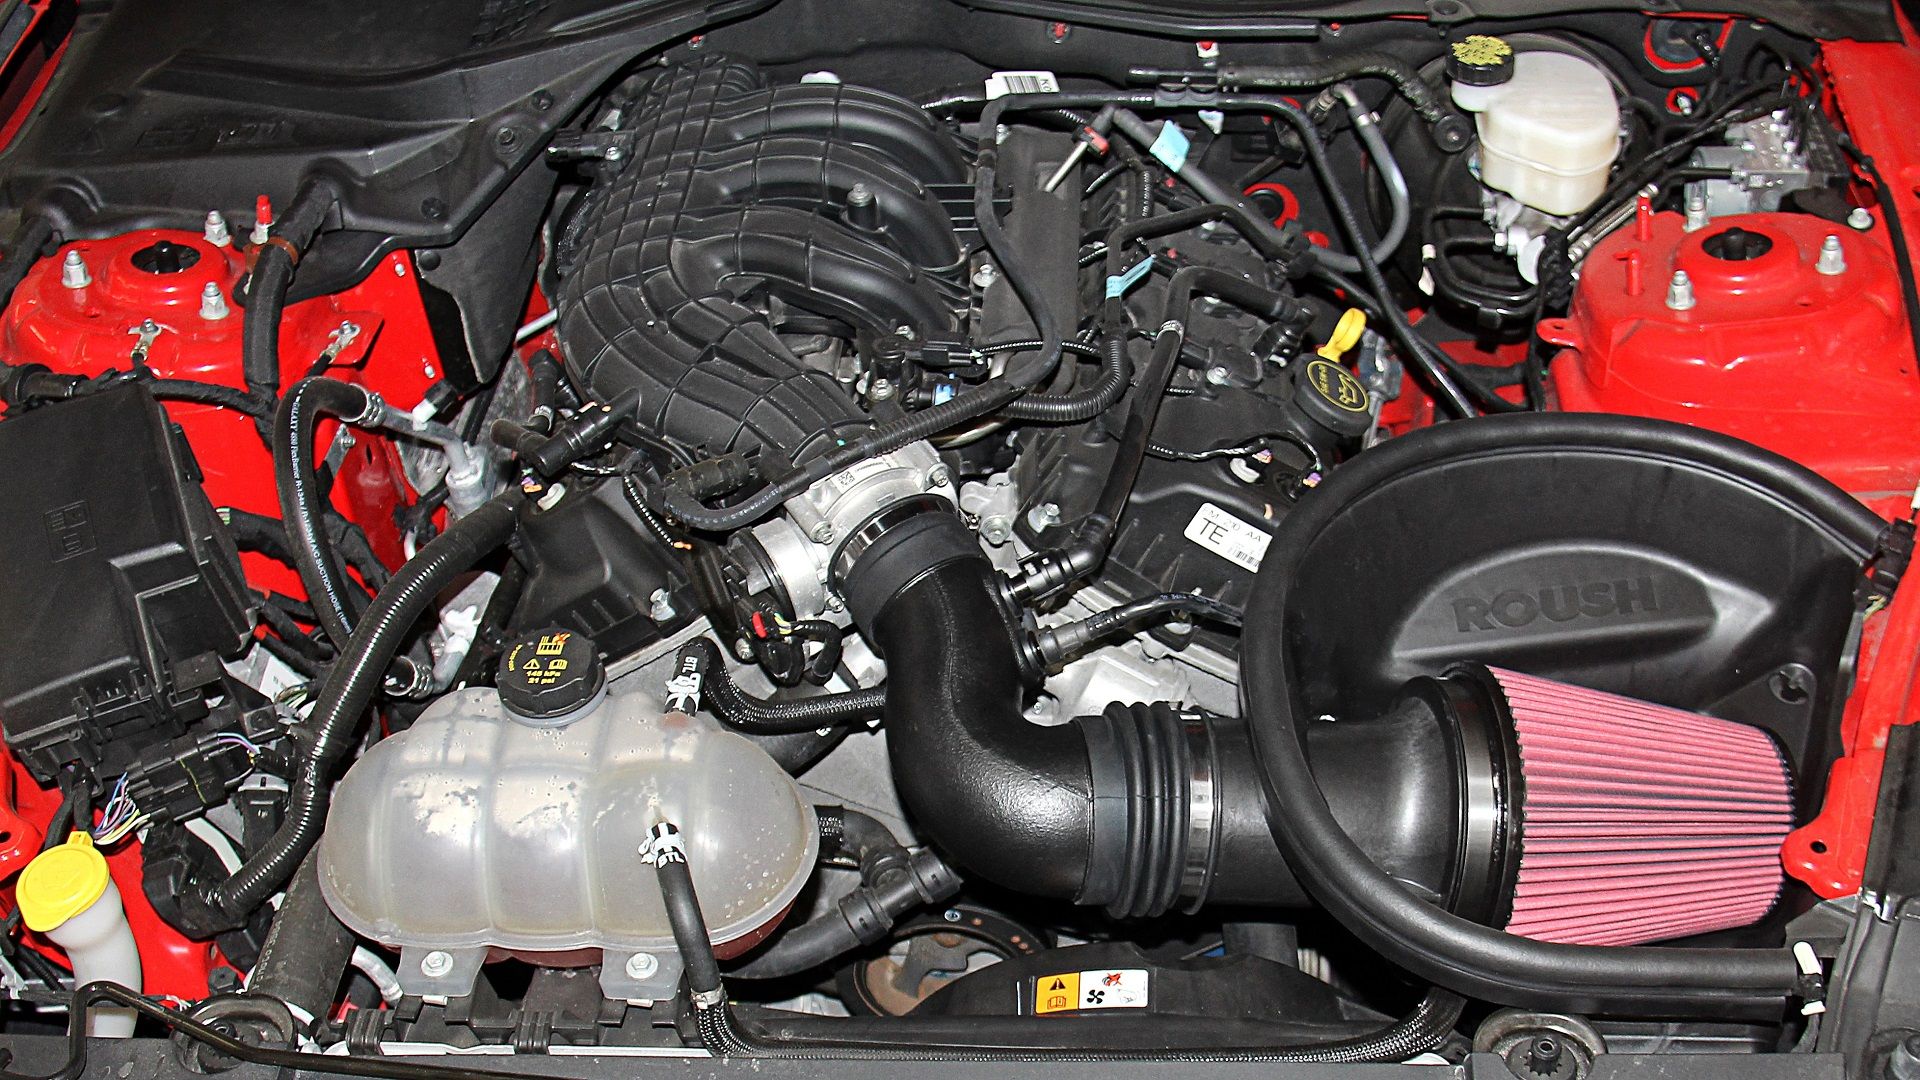 A cold air intake system